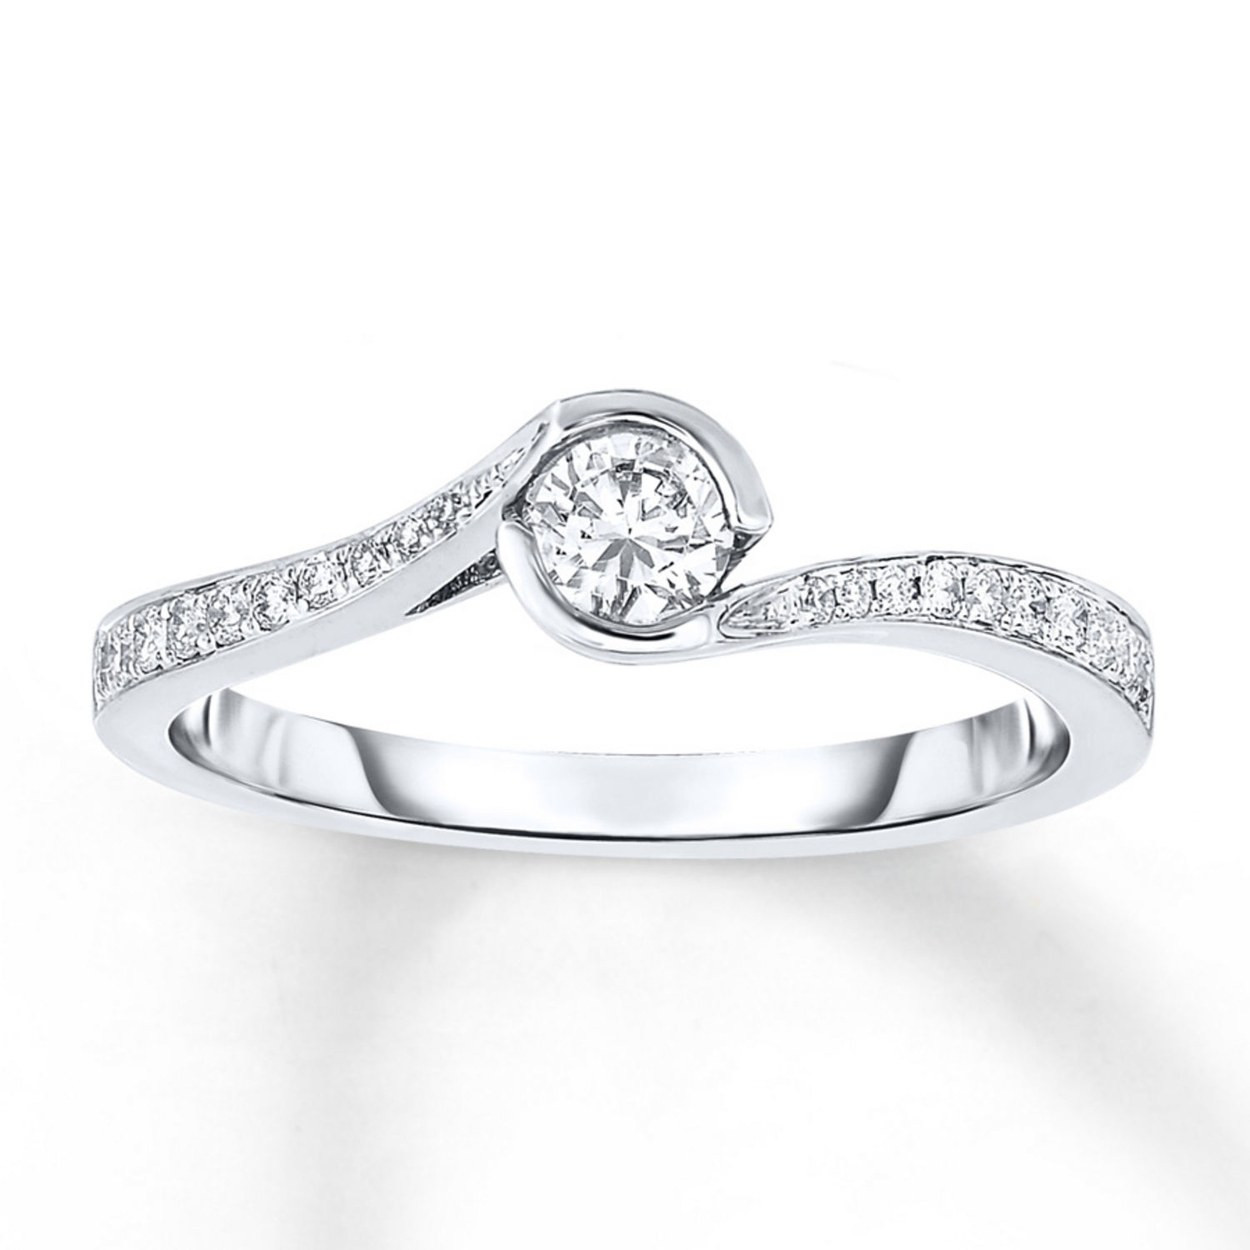 Wedding Rings Under 1000
 Affordable Engagement Rings Under $1 000